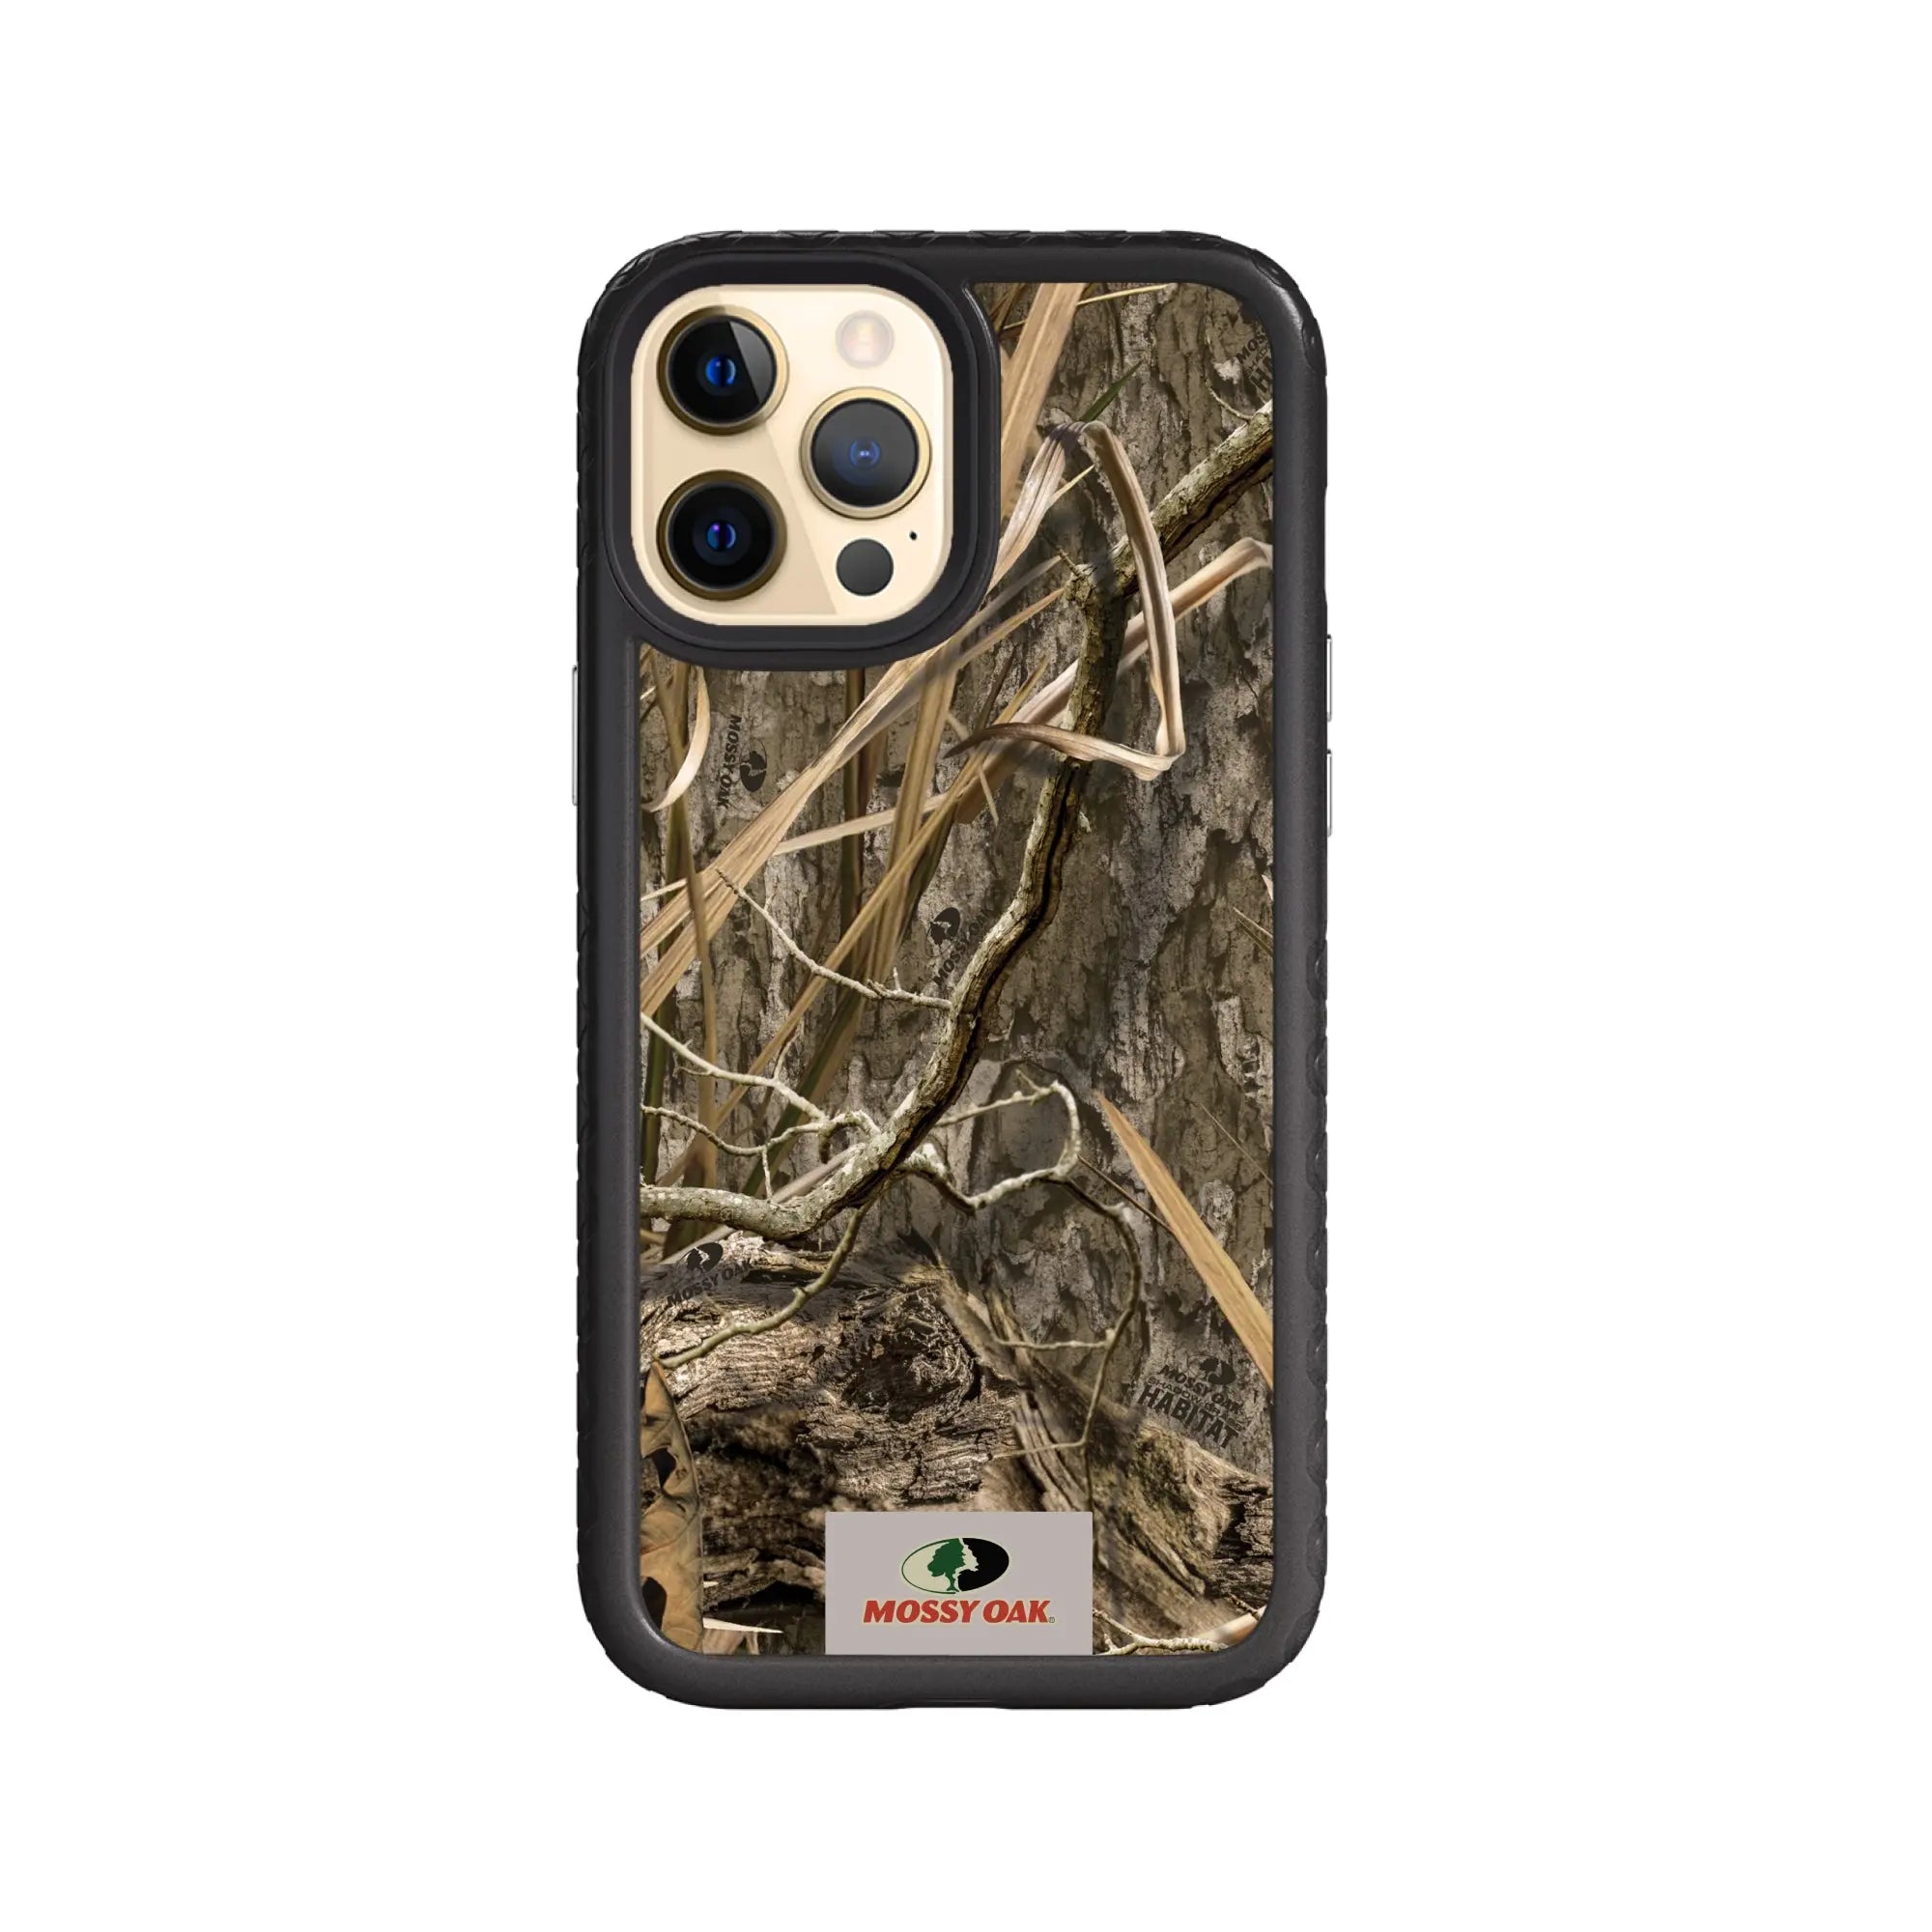 Mossy Oak Fortitude Series for Apple iPhone 12 Pro Max - Shadow Grass - Custom Case - OnyxBlack - cellhelmet